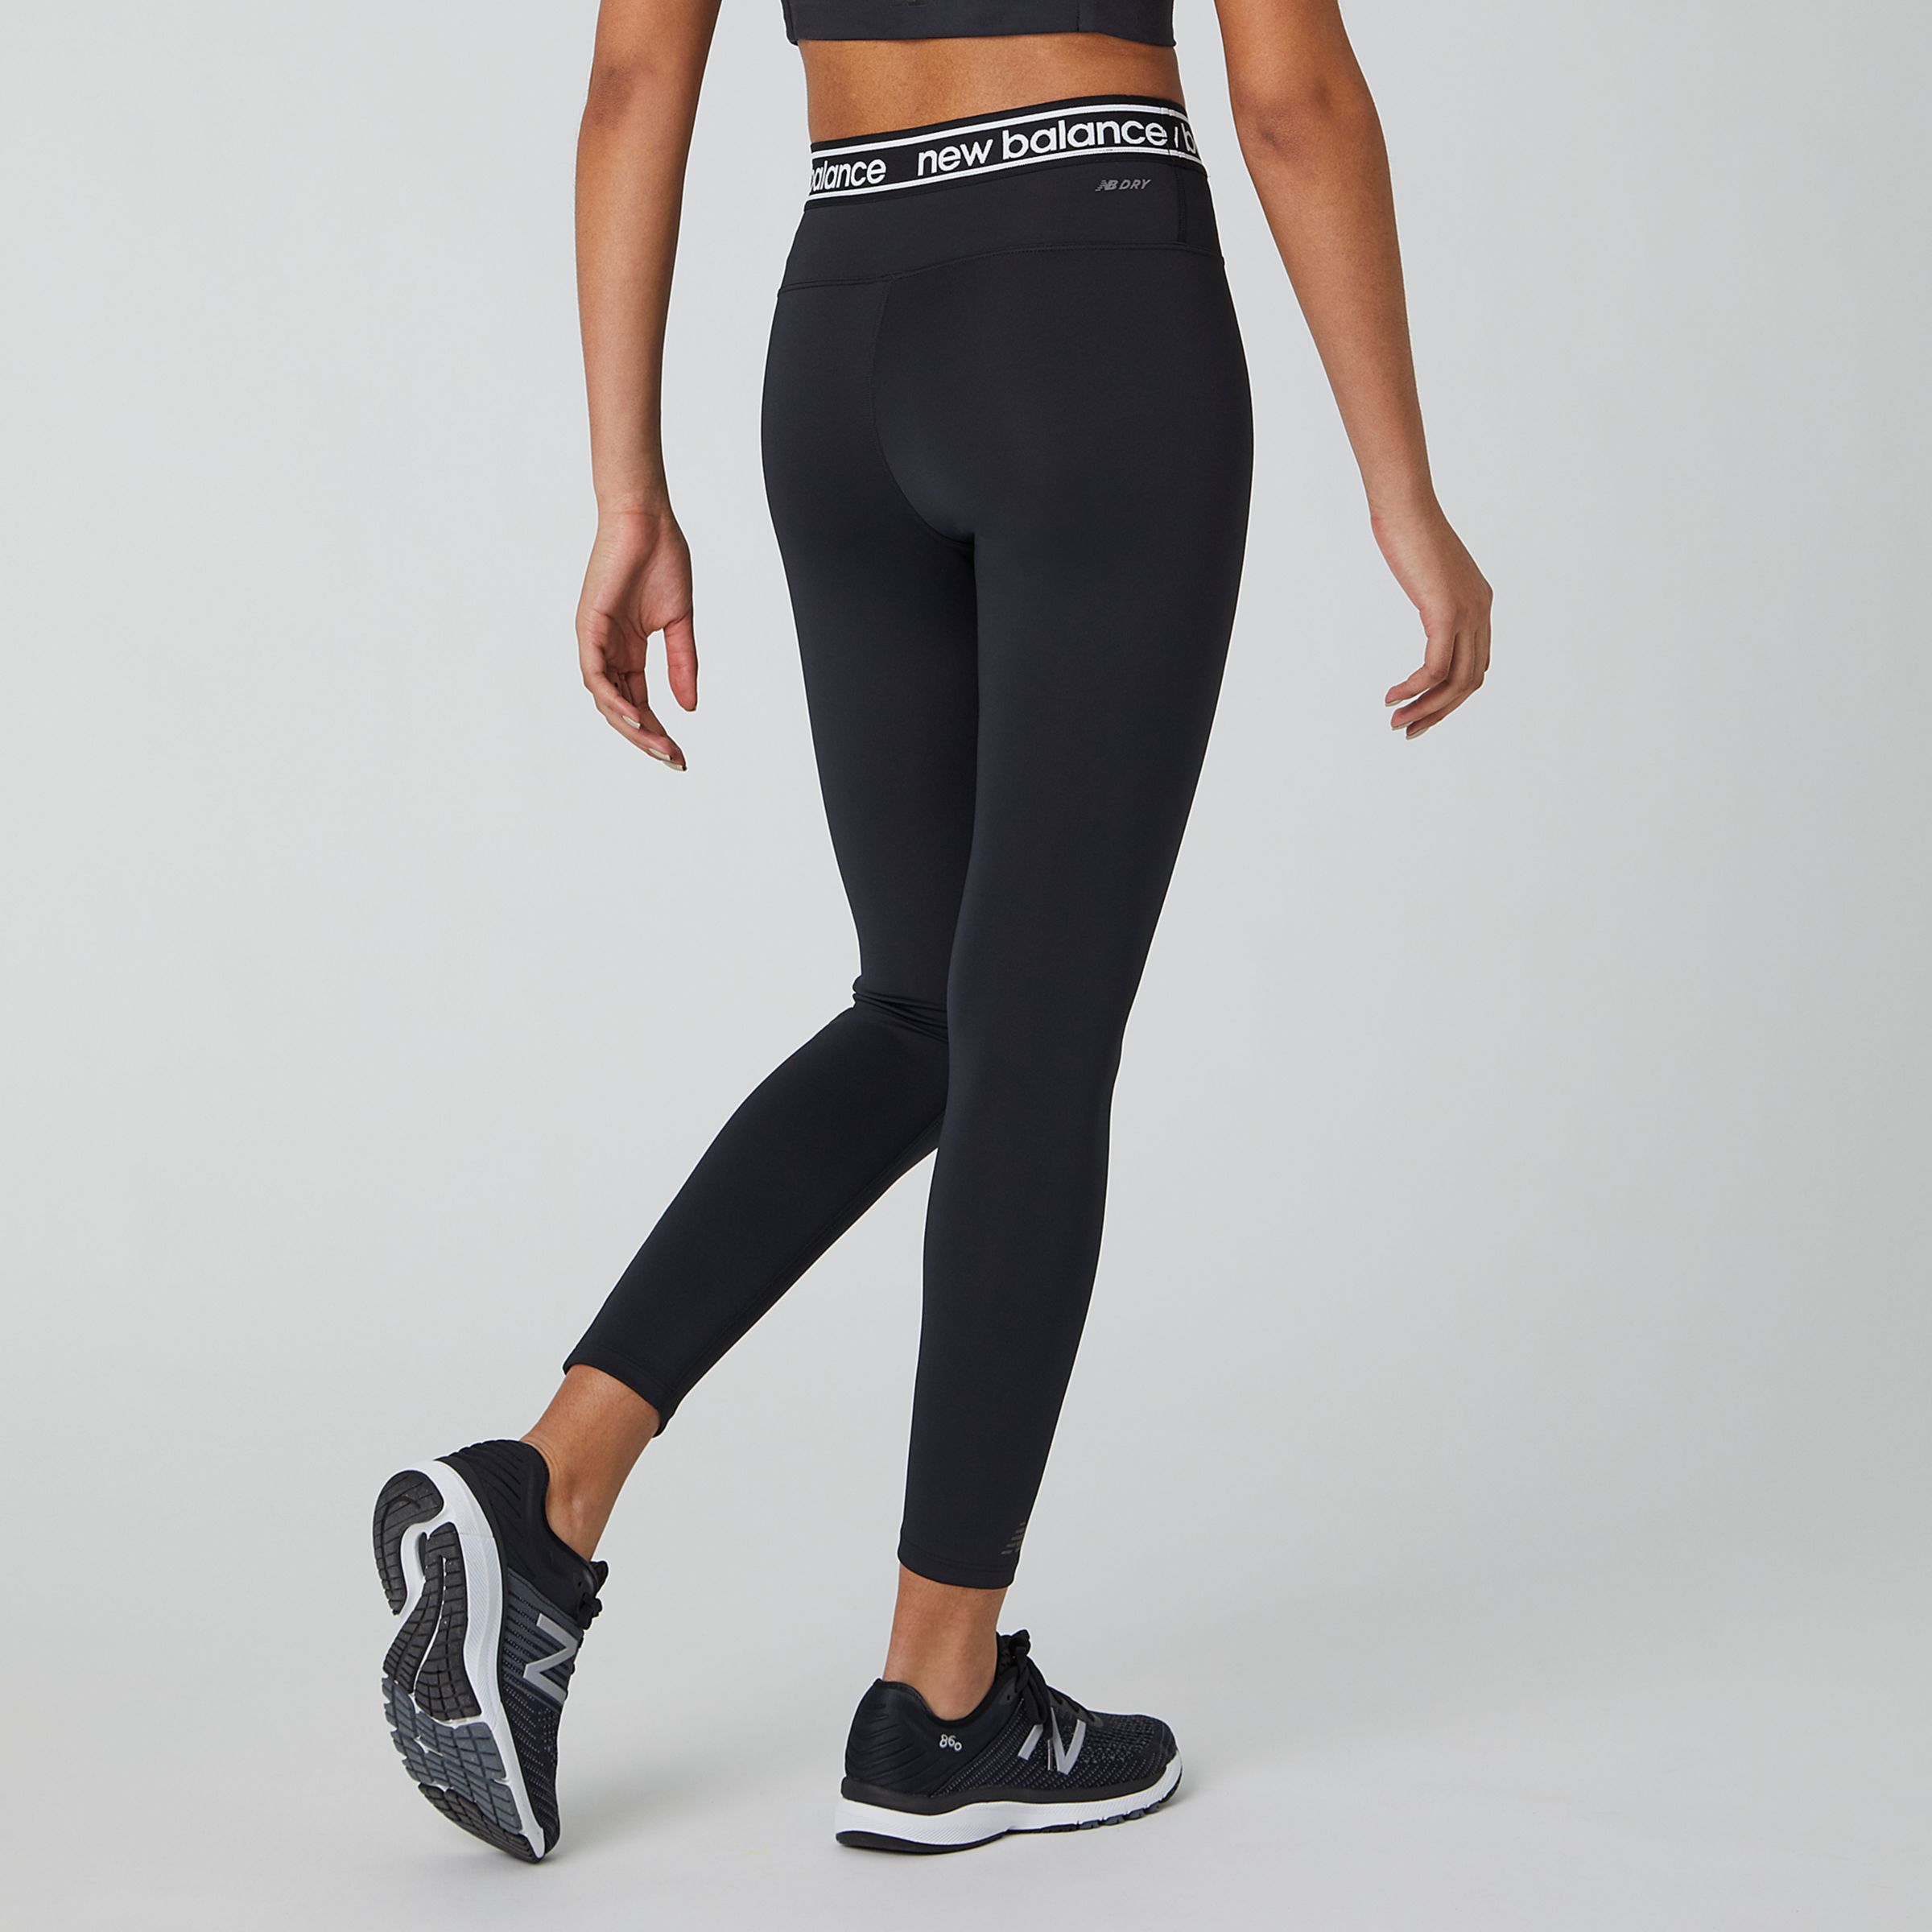 Relentless High Rise 7/8 Tight Mujer - New Balance